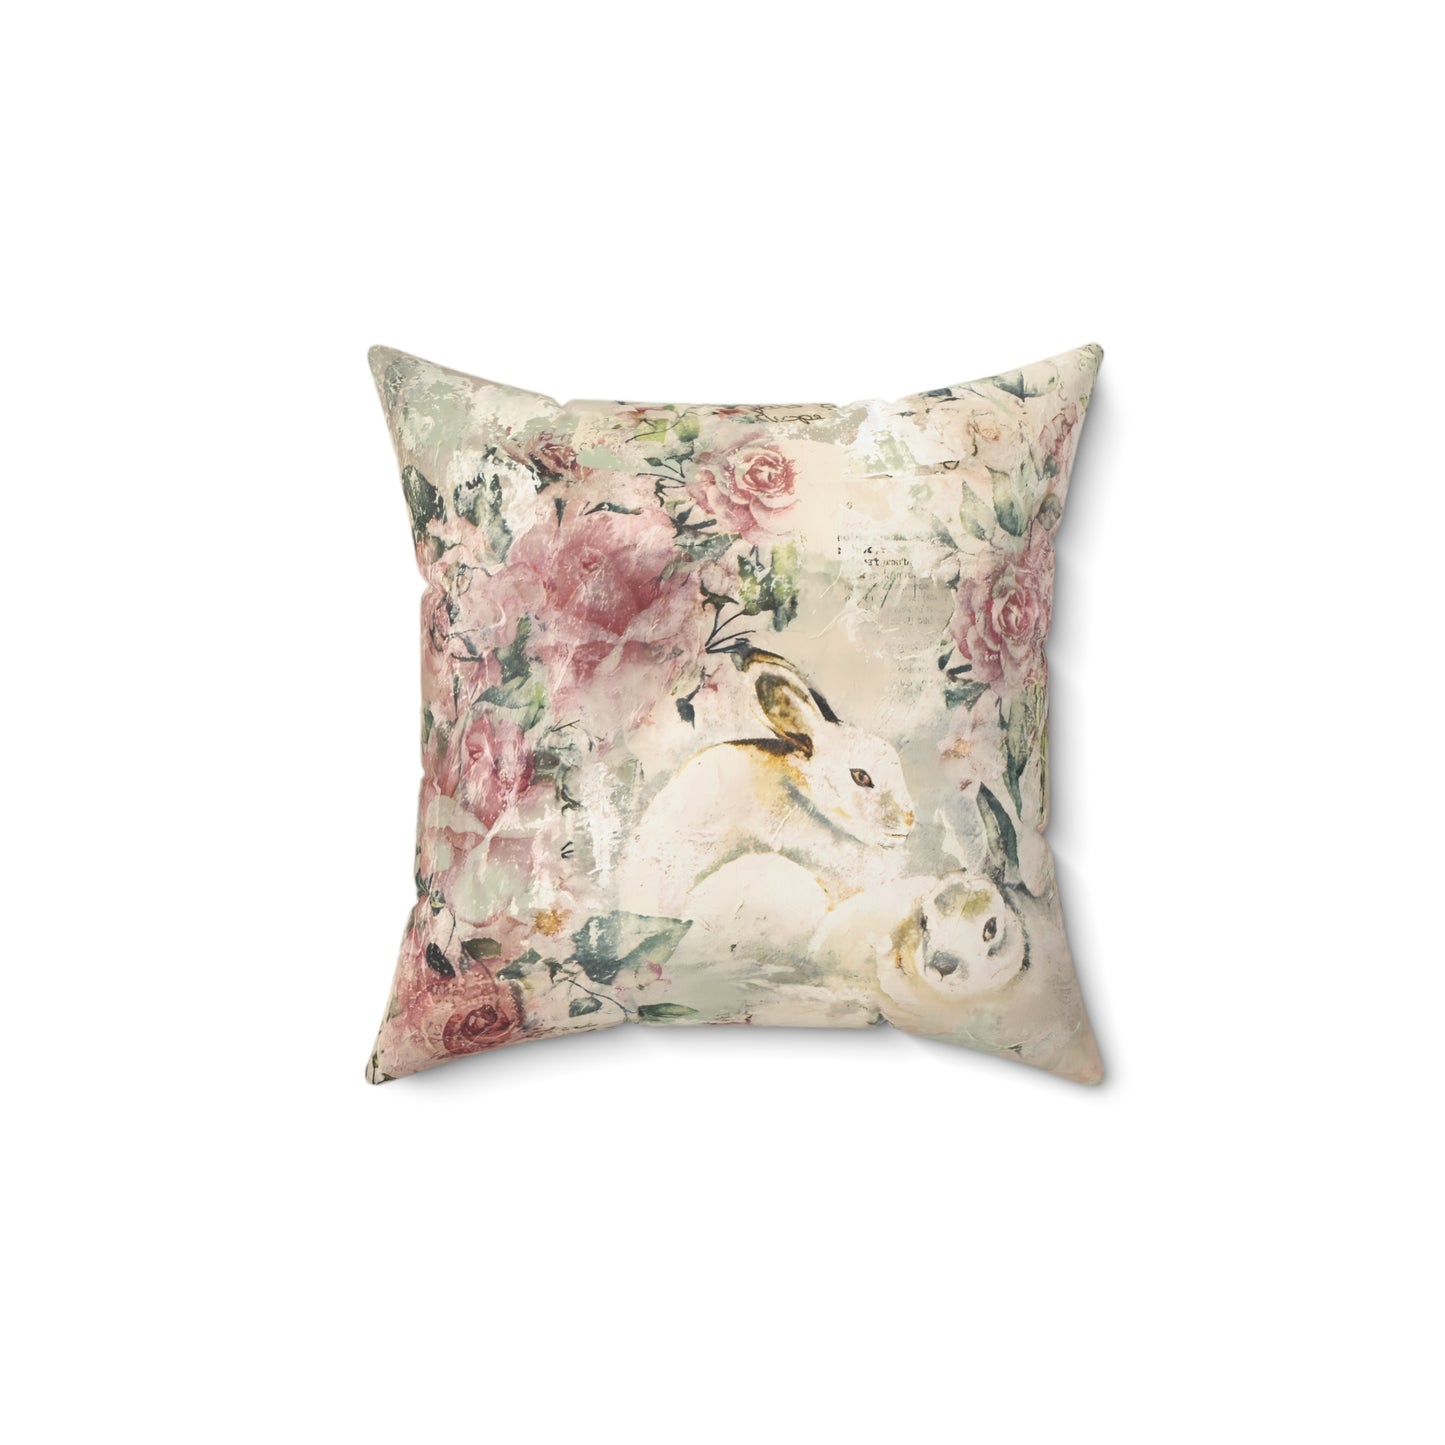 Cottage Roses Square Pillow 14' x 14"